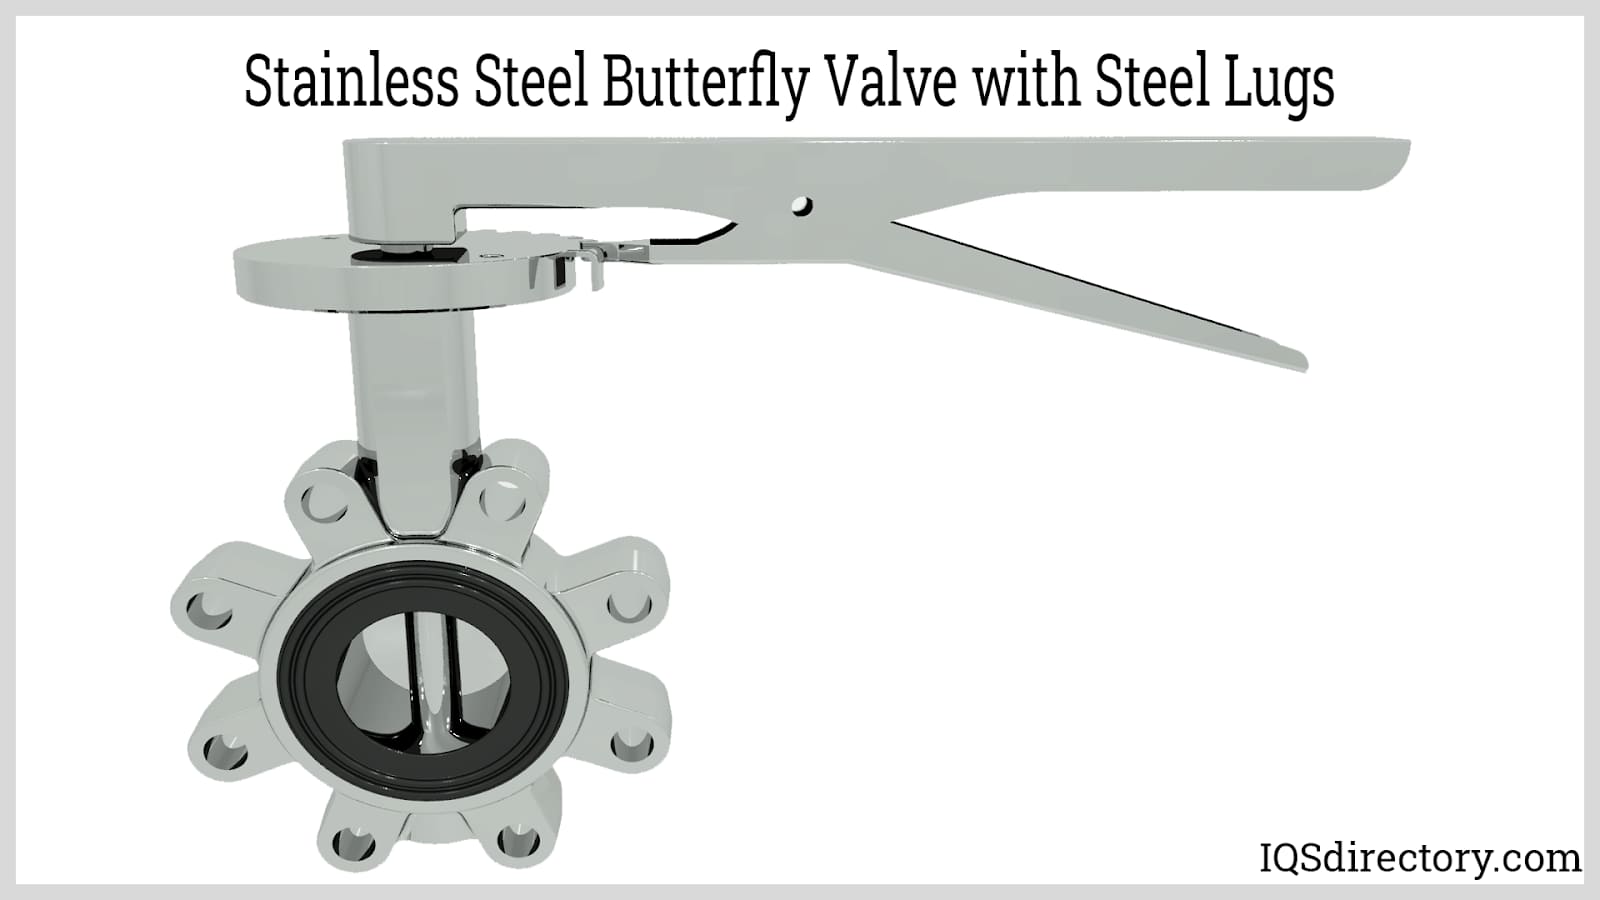 Stainless Steel Butterfly Valve with Steel Lugs